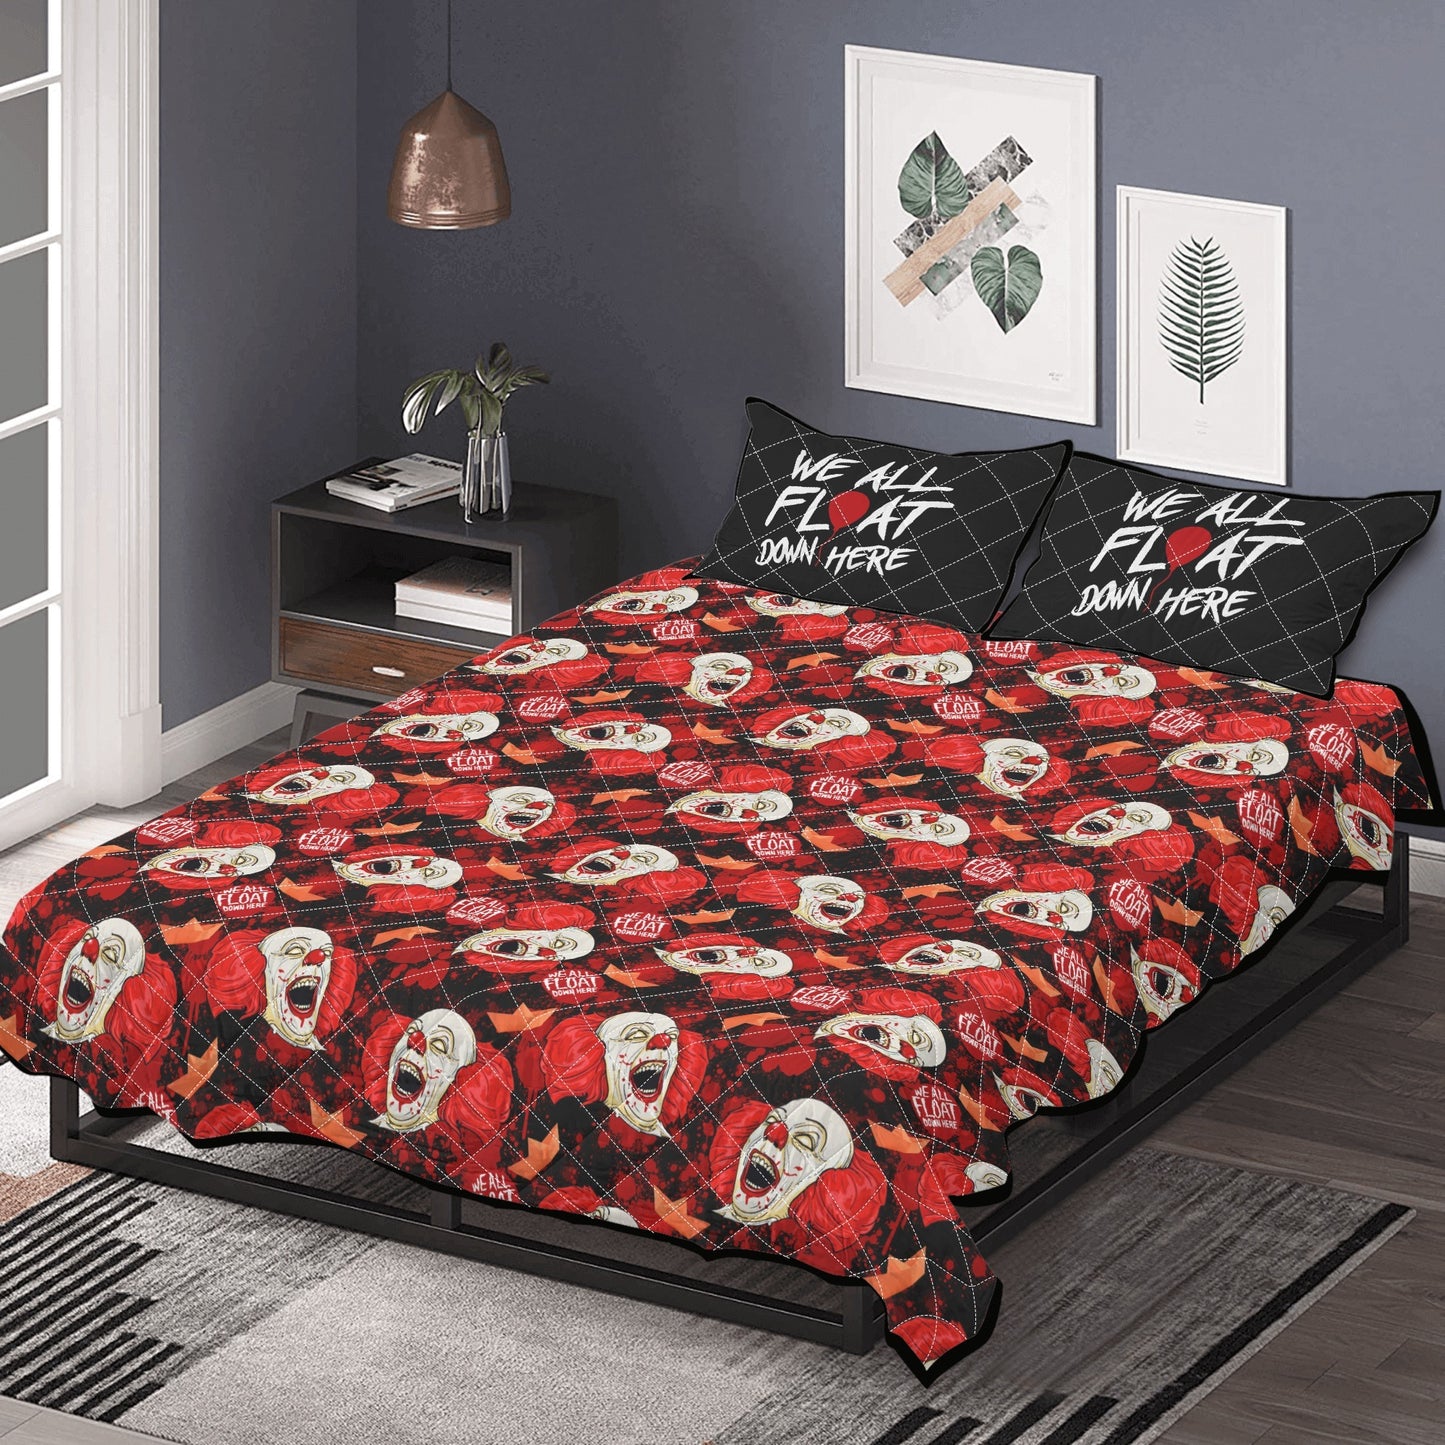 You'll Float Too Quilt Bed Set